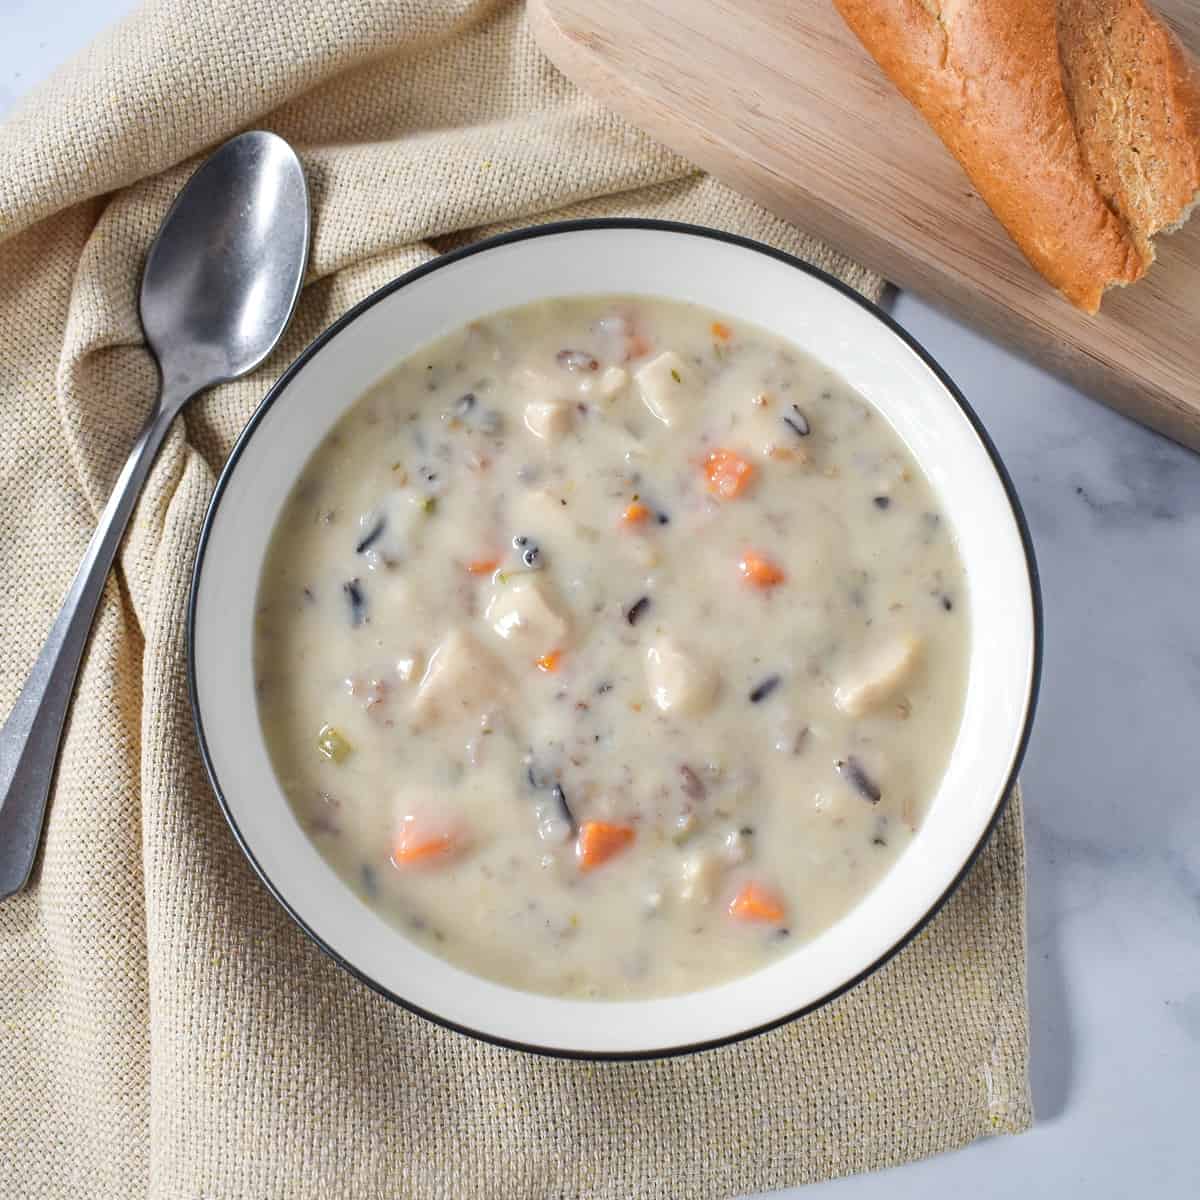 https://www.cook2eatwell.com/wp-content/uploads/2018/05/chicken-and-wild-rice-soup-image-1.jpg